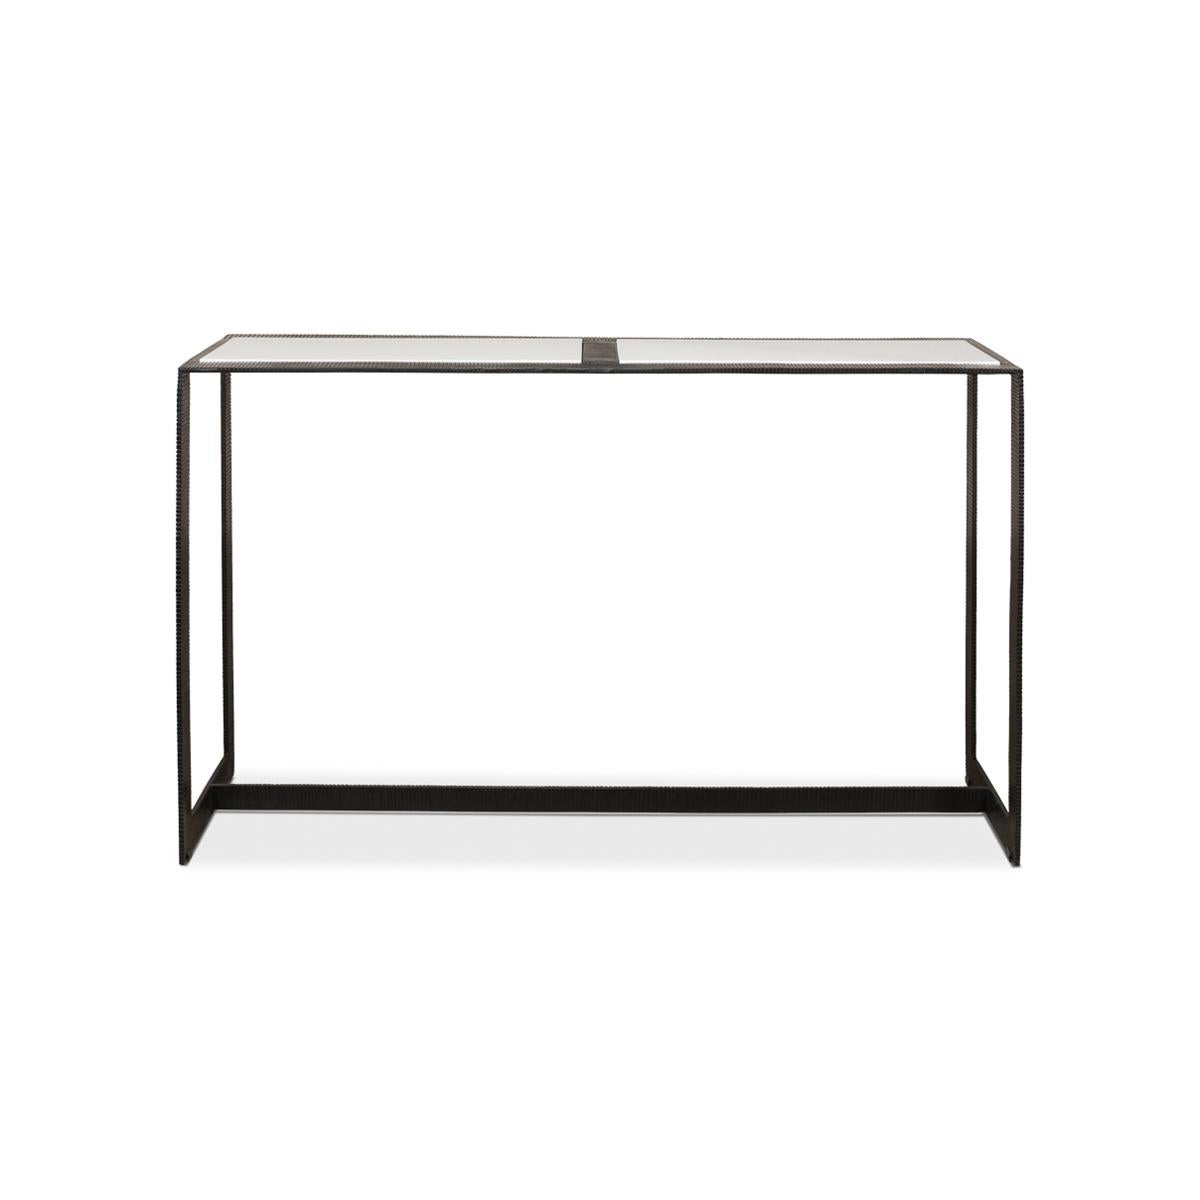 The epitome of contemporary elegance: our modern marble top iron console table. With a sleek black iron frame, featuring a captivating ridged design, this piece exudes sophistication and style. The white marble top, inset flawlessly into the frame,